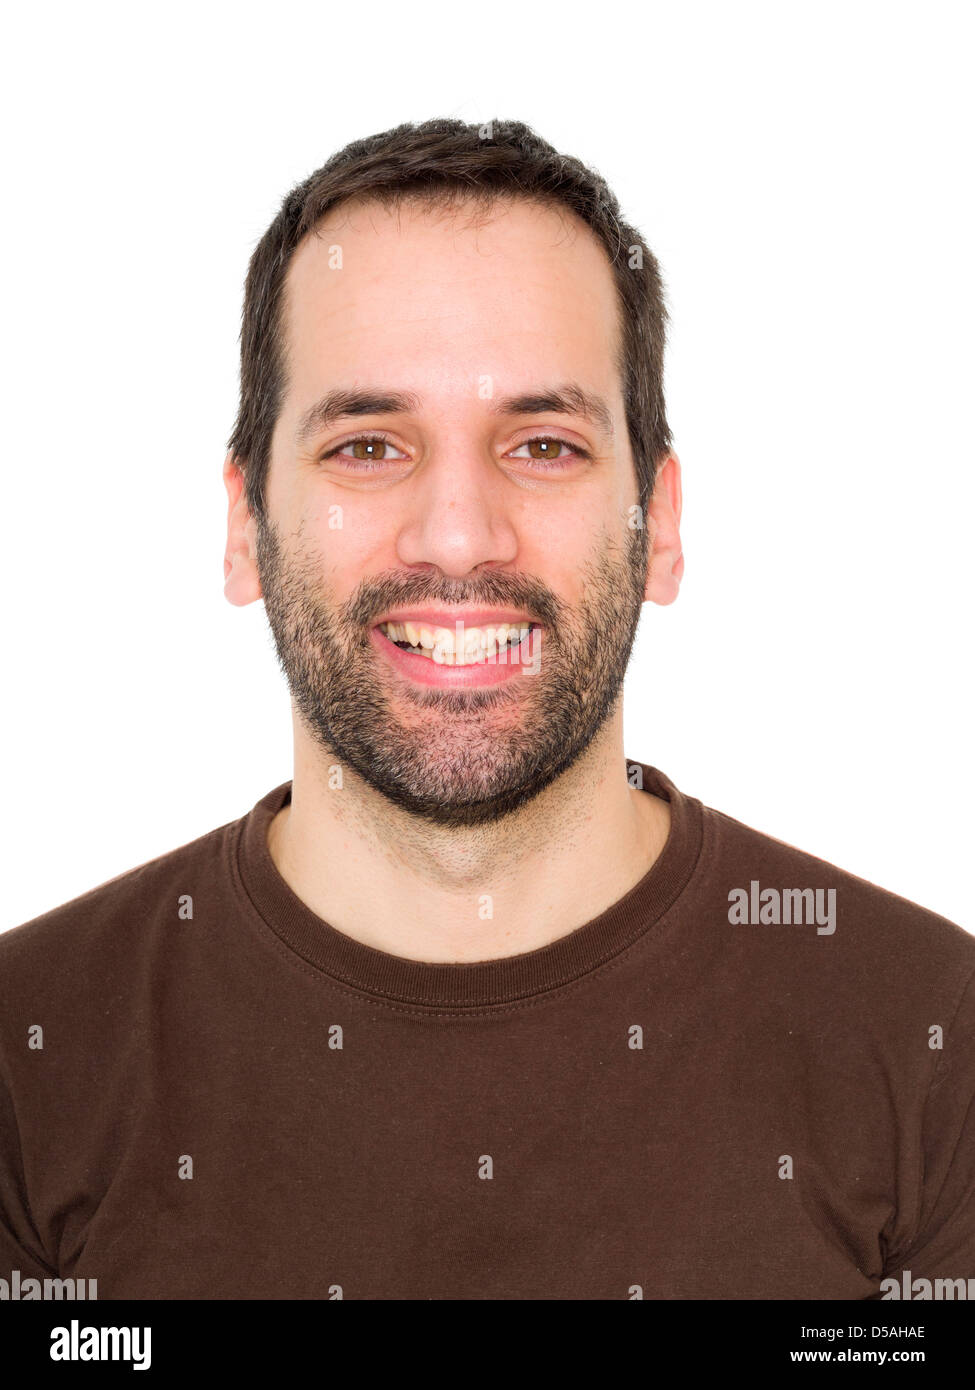 Portrait of a 3-day bearded young man smiling Stock Photo